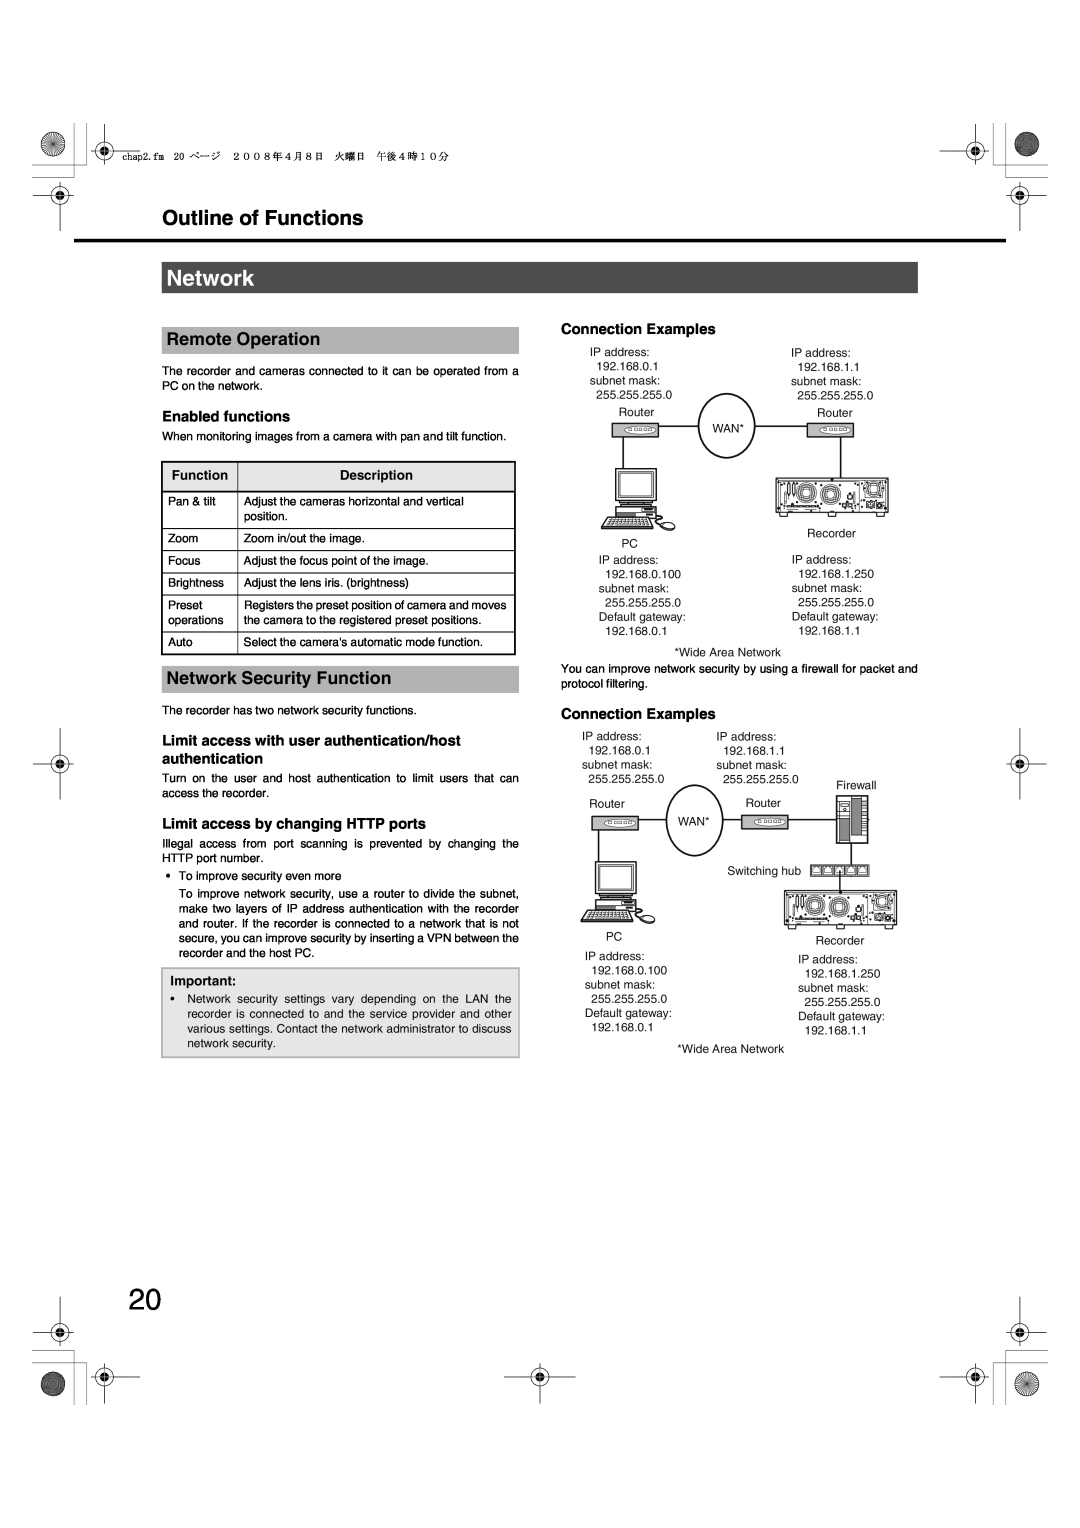 Panasonic WJ-ND400 Network, Enabled functions, Limit access by changing HTTP ports, Connection Examples, Function, Router 